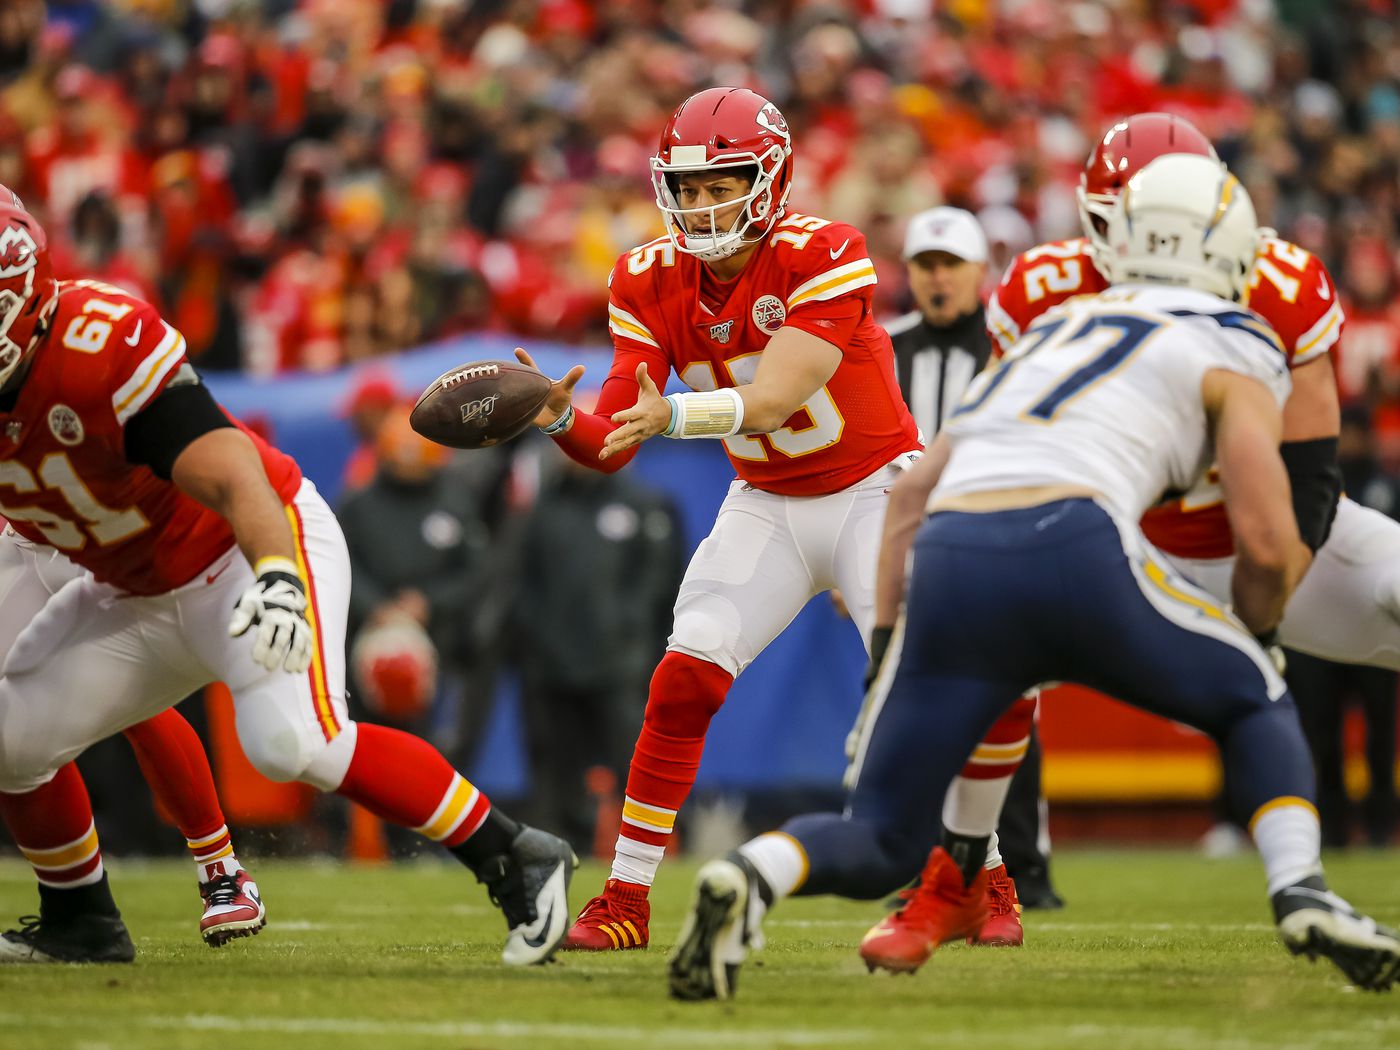 Chiefs vs. Chargers: Game and score predictions - Arrowhead Pride